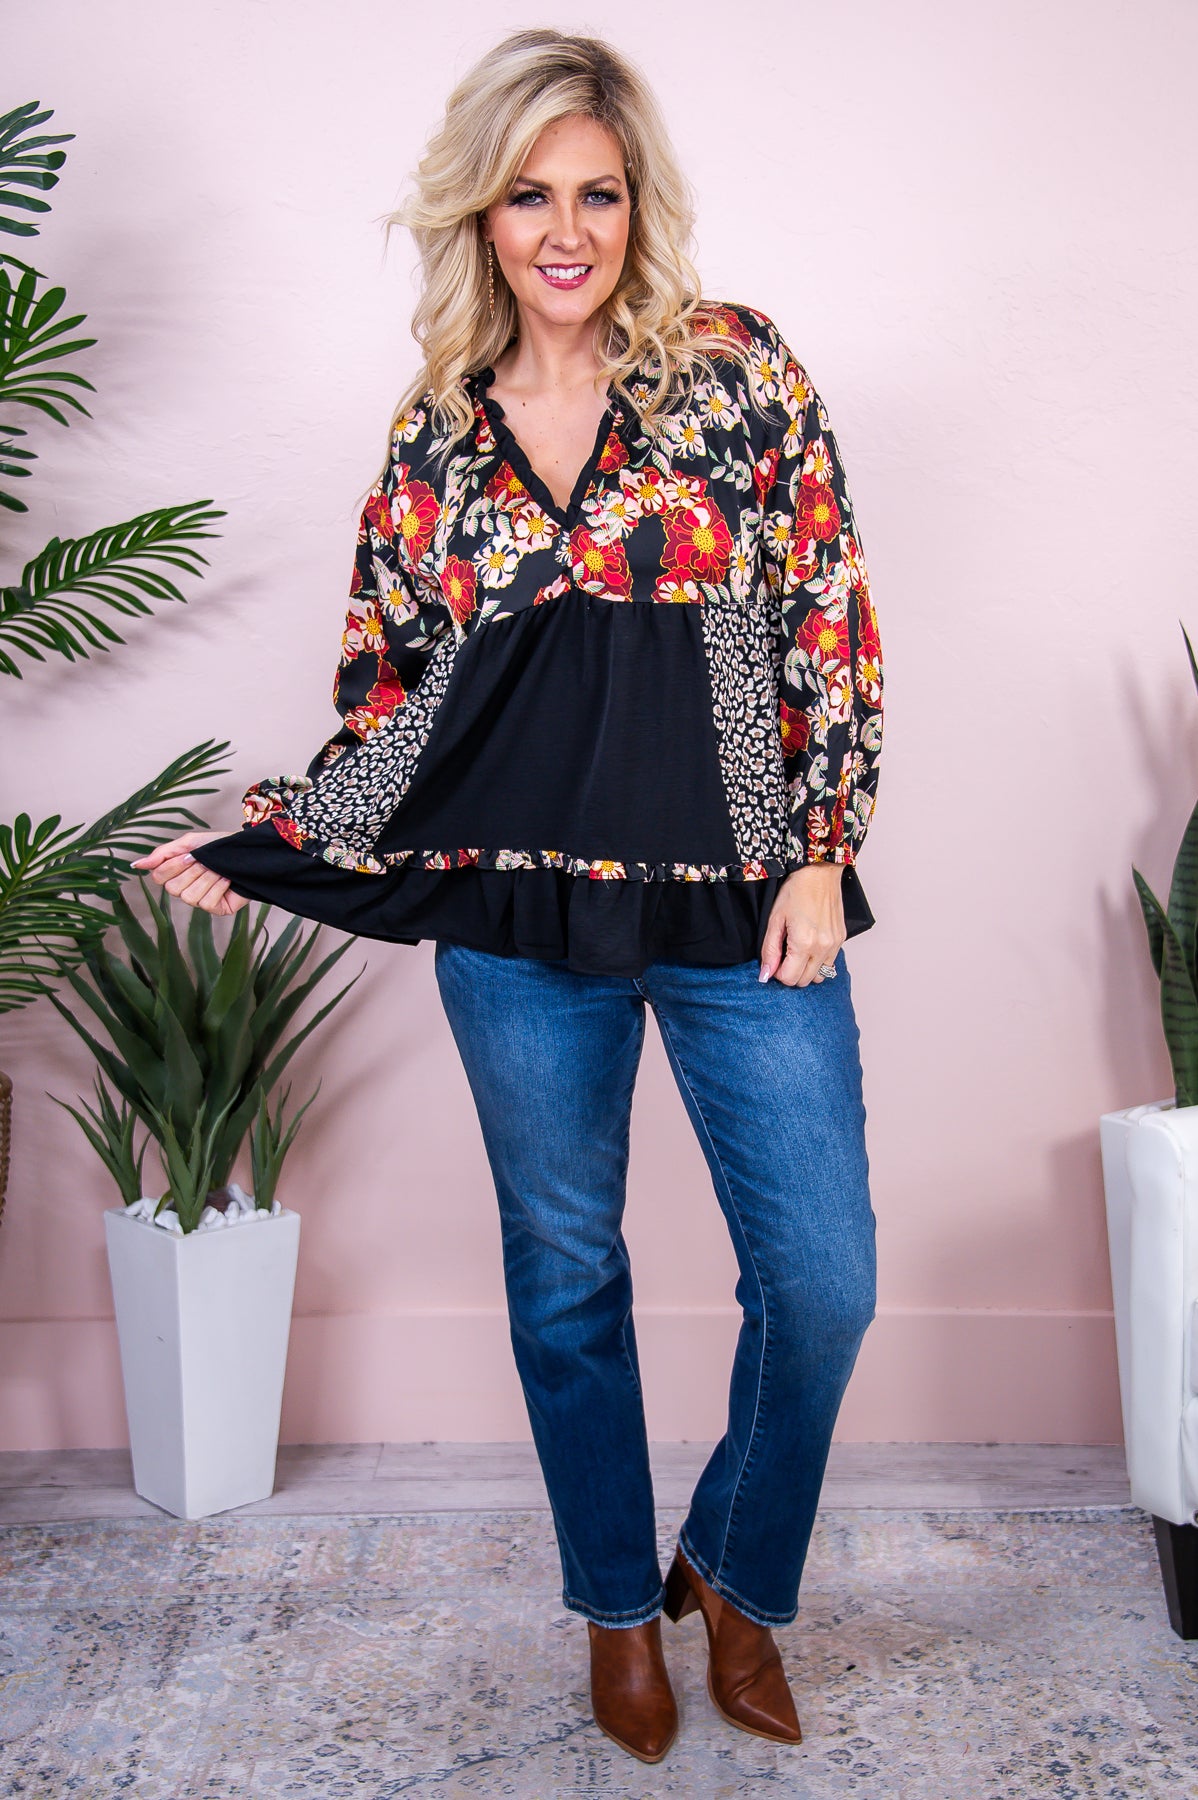 Country Life Black/Multi Color Floral/Printed Babydoll Top - T8193BK